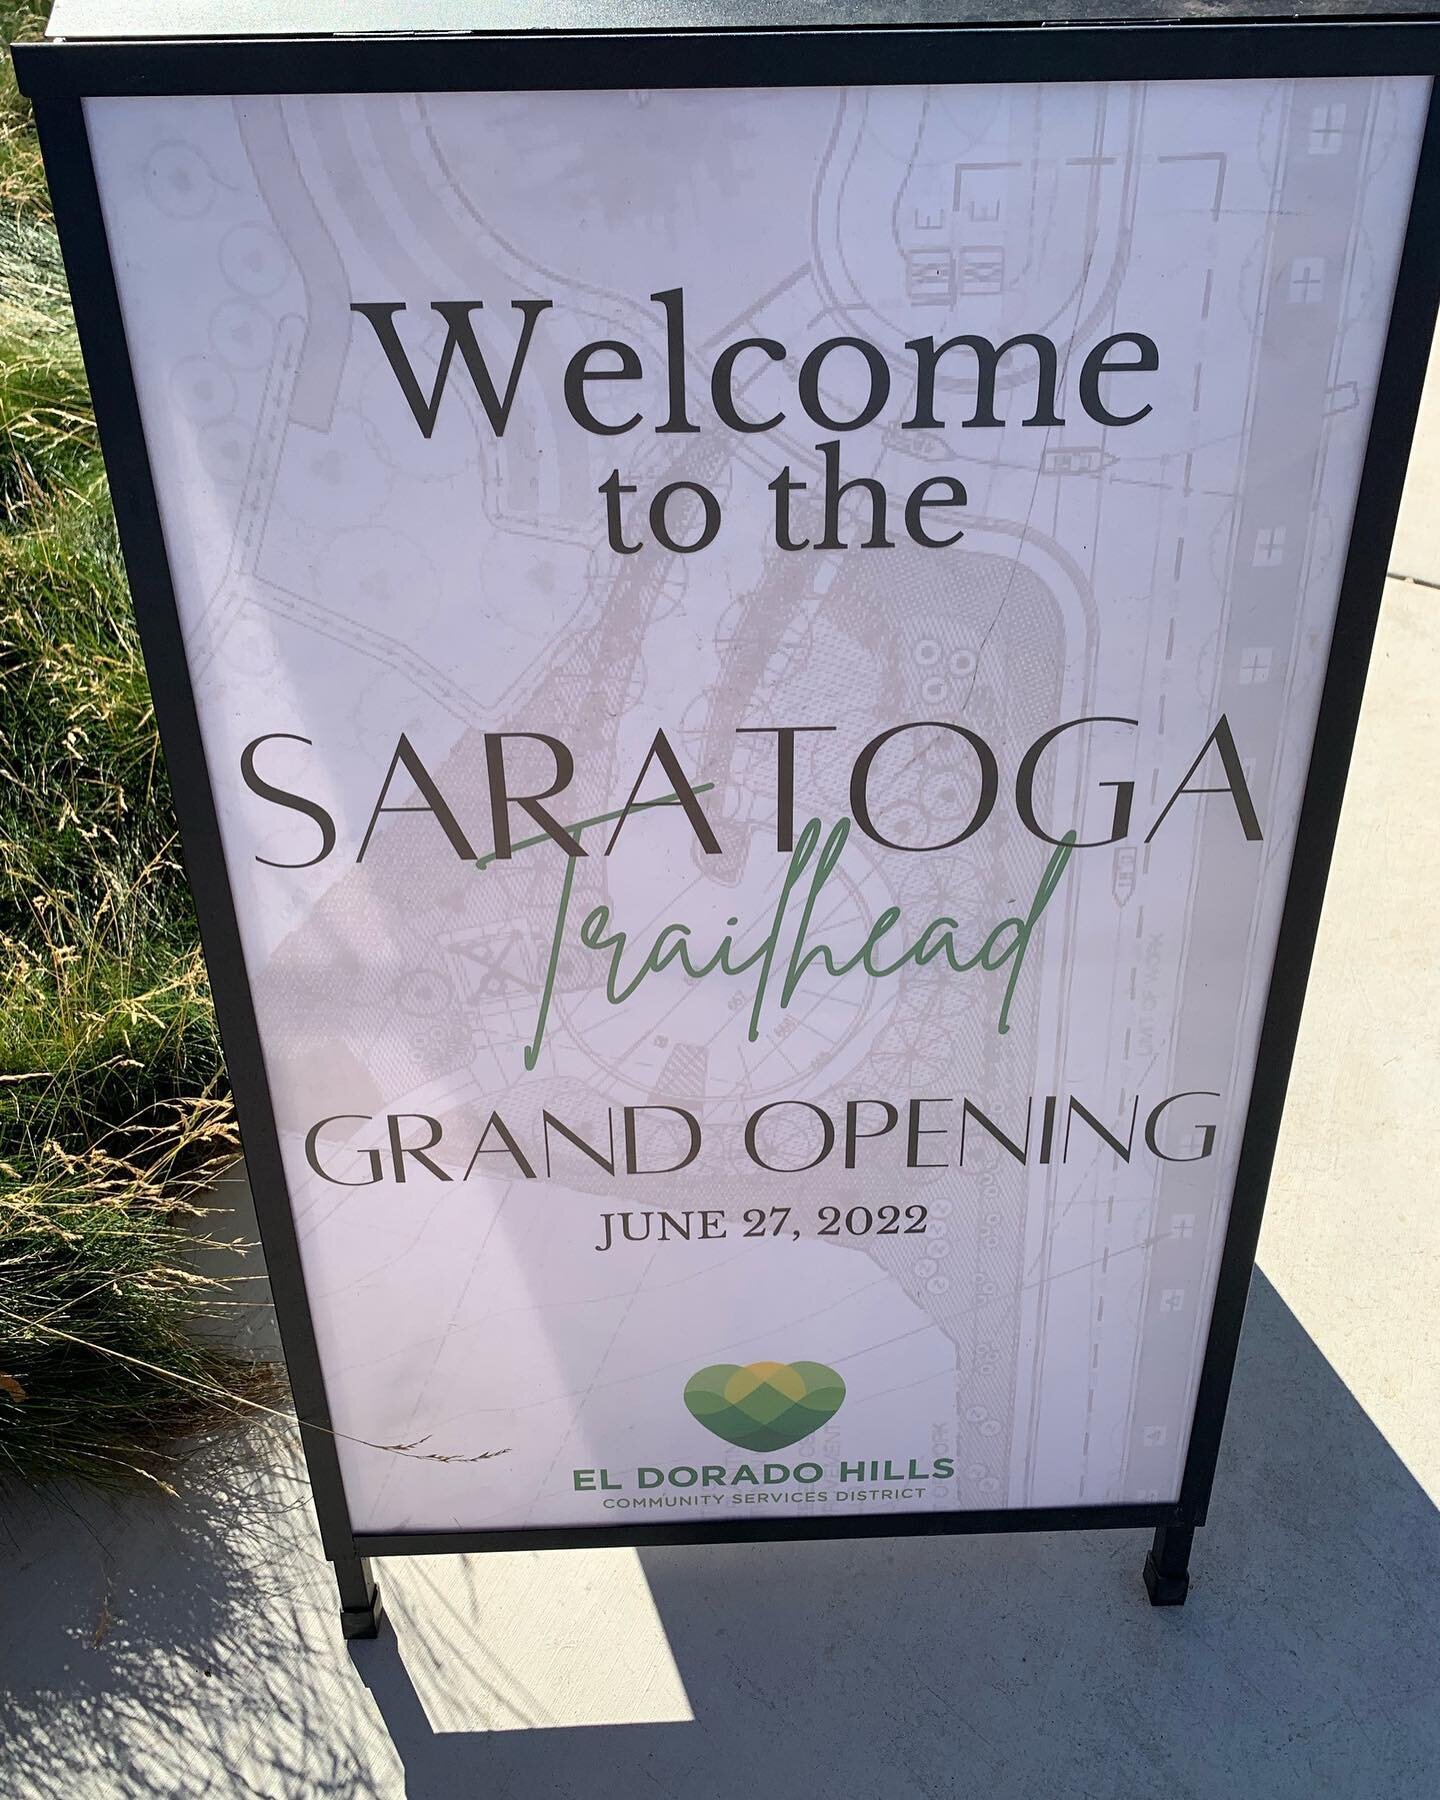 As of yesterday evening, Saratoga Trailhead is officially open 🥳🎉 Thanks to the Trojans who were able to go and show our support 
#morekidsonbikes #moretrails #trojanpride80 #edhtrails #edhcsd